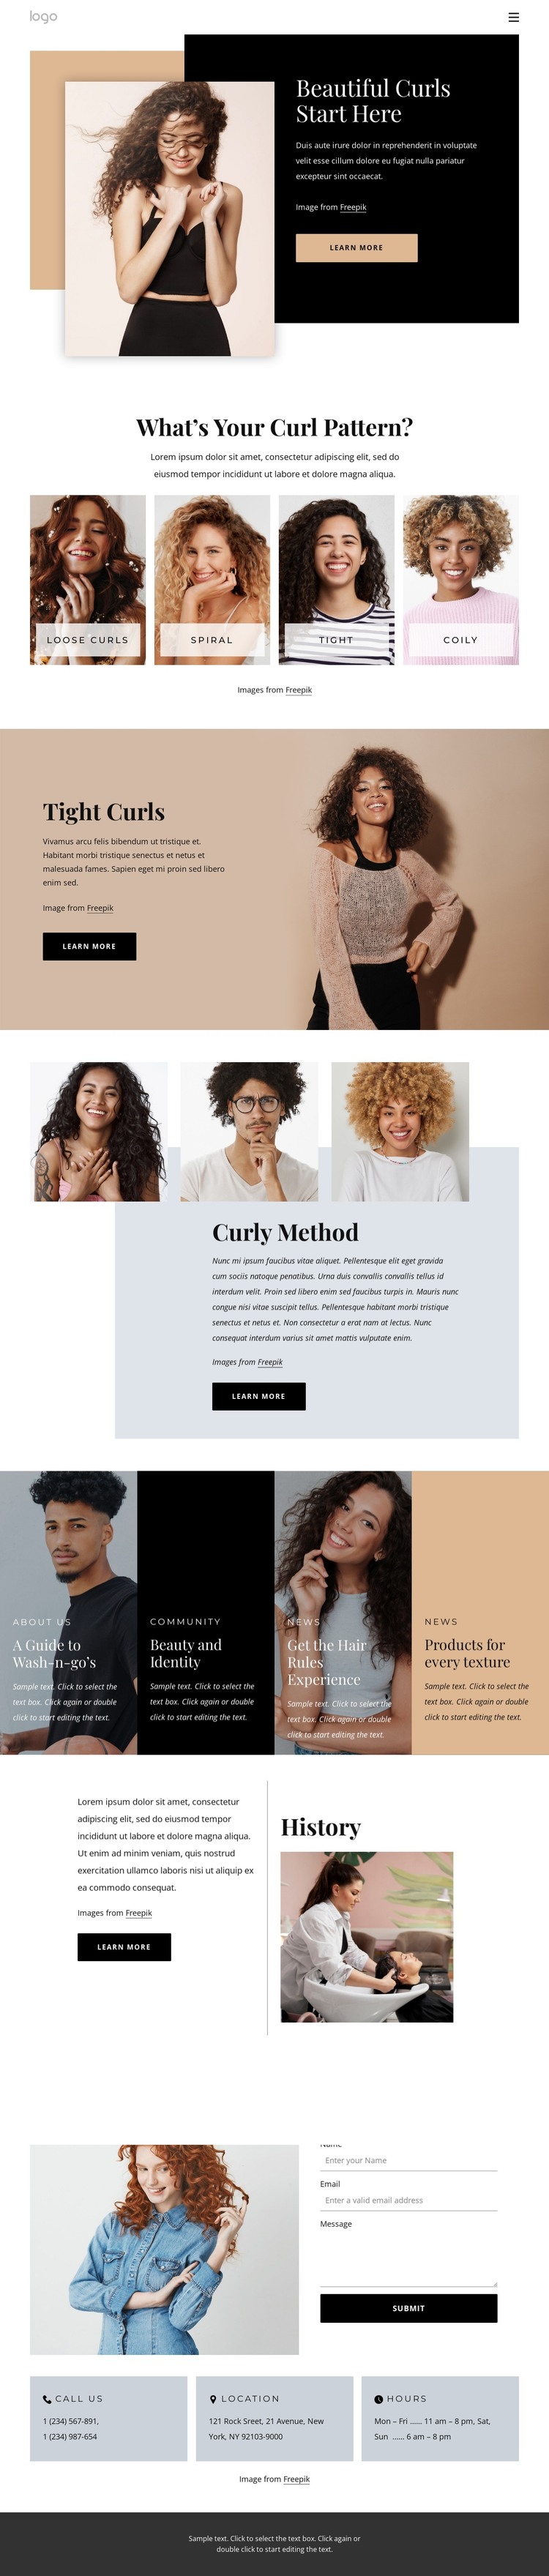 Bring out the best in your curls HTML Template